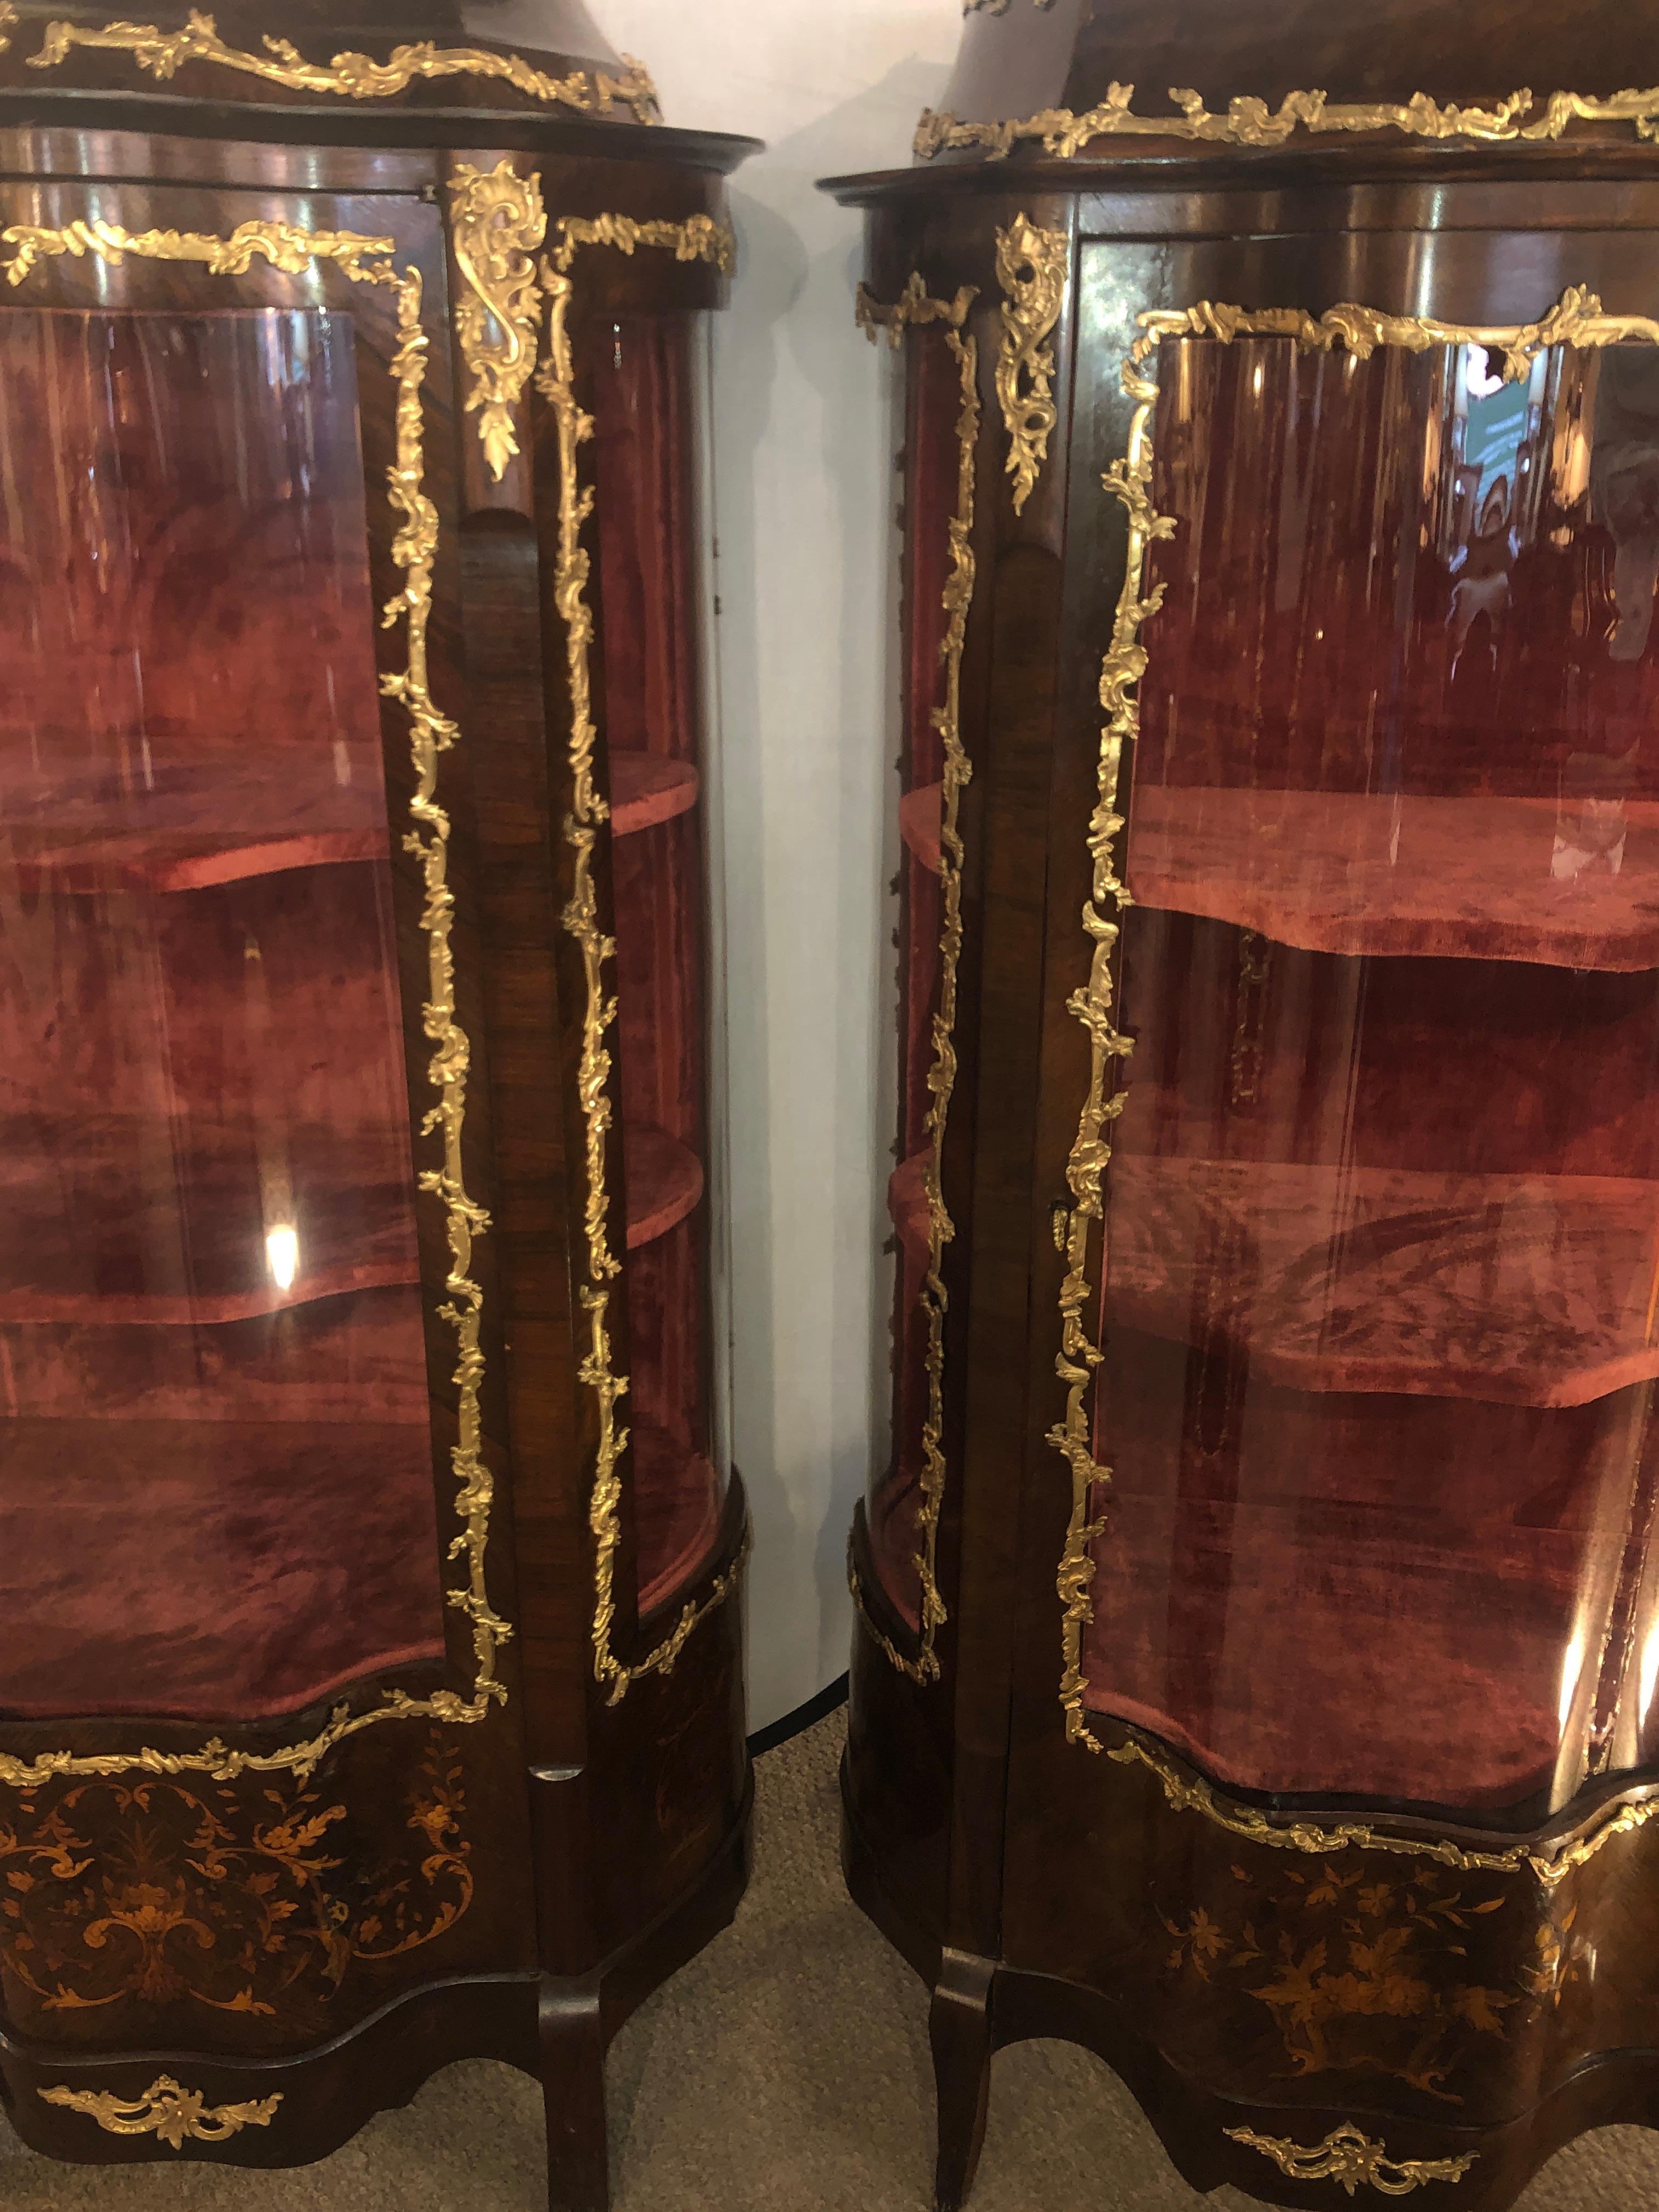 Pair of compatible 19th or early 20th century French Louis XV style bronze mounted inlaid vitrines or curio cabinets. Each having been fully refinished with new recovered velour interiors. The center double serpentine glass front doors leading to